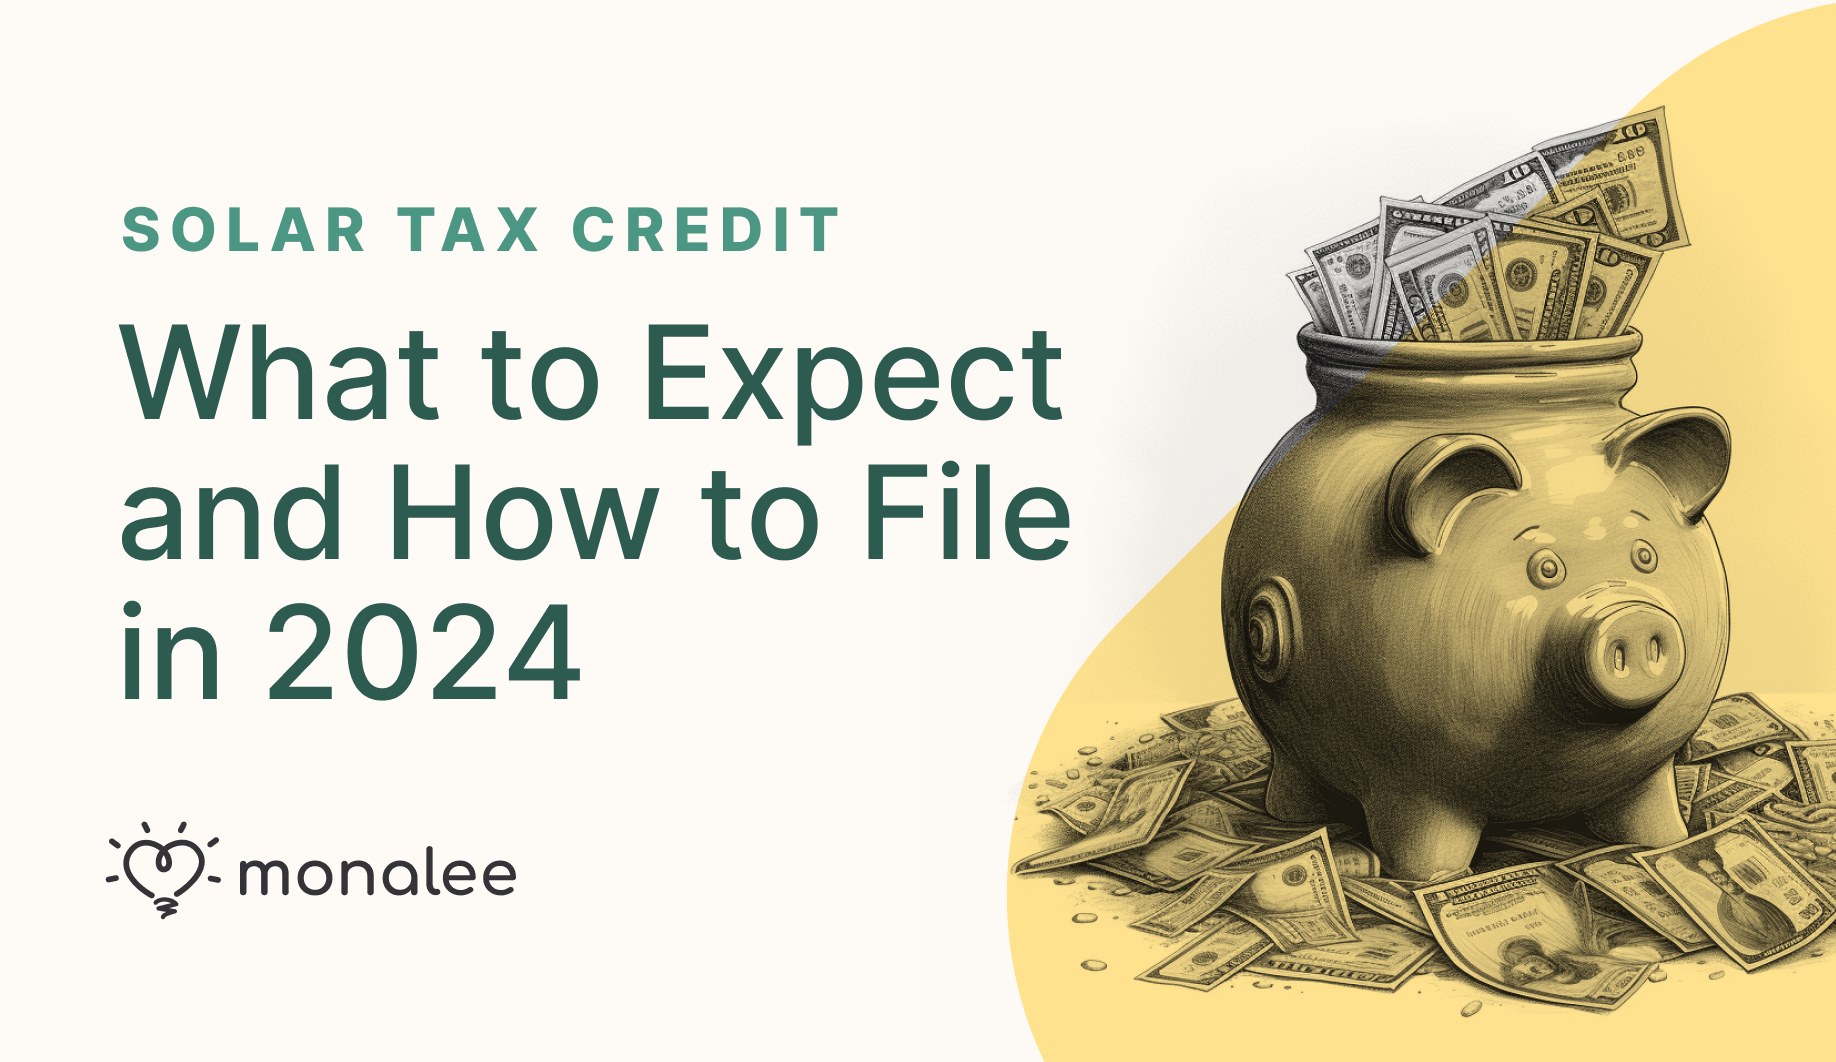 Solar Tax Credit: What to Expect and How to File in 2024